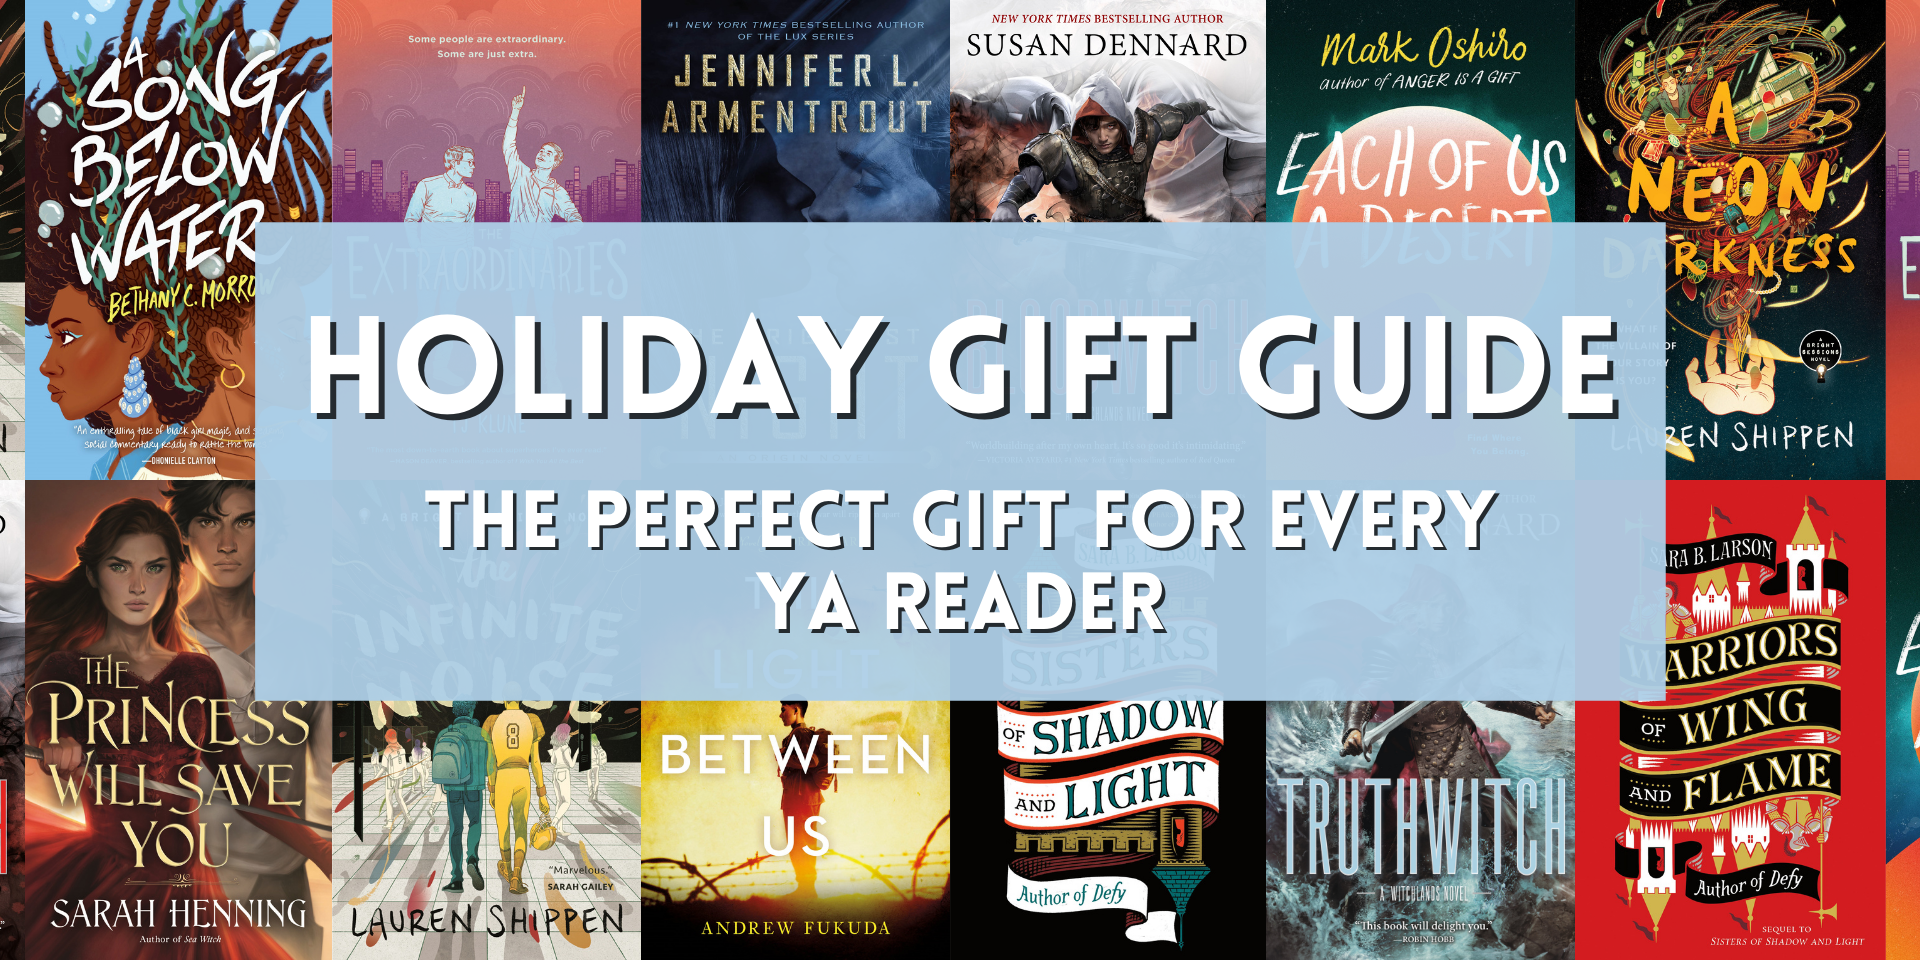 Holiday Gift Guide: The Perfect Gift for Every YA Reader